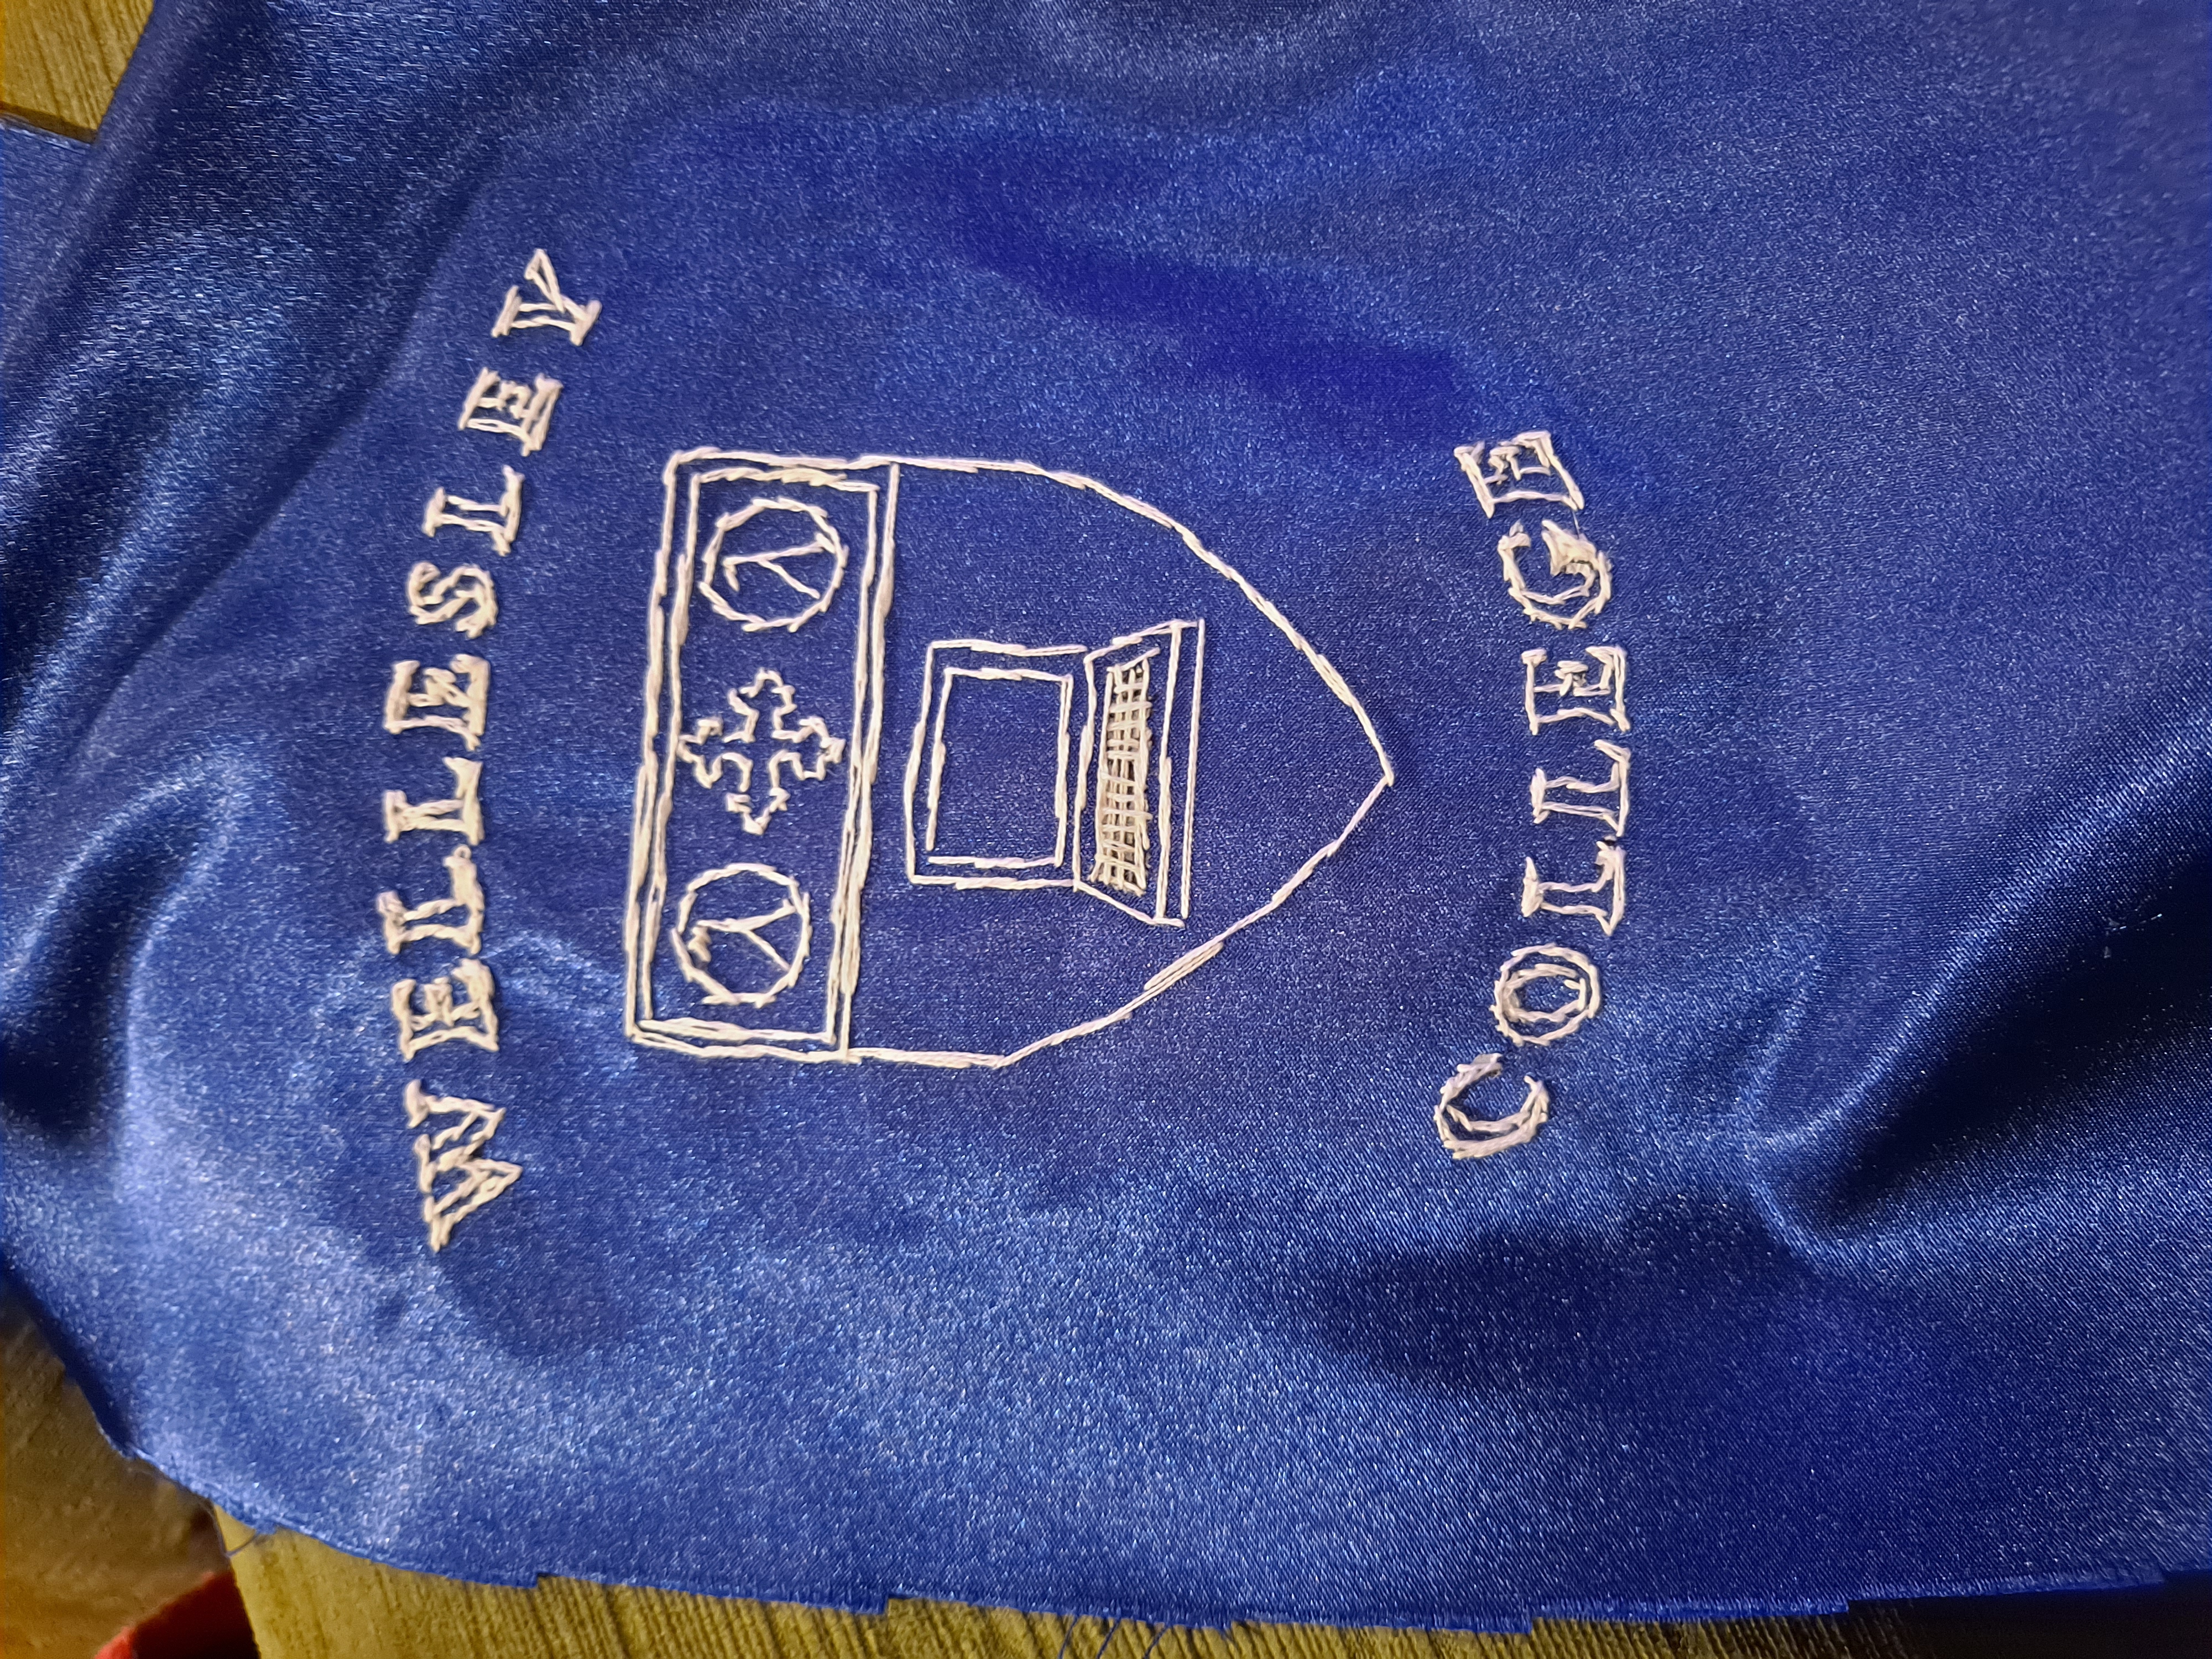 picture of Allison's hand-embroidered rendering of the Wellesley College CS department's logo, which features a laptop and lambda symbols on a shield